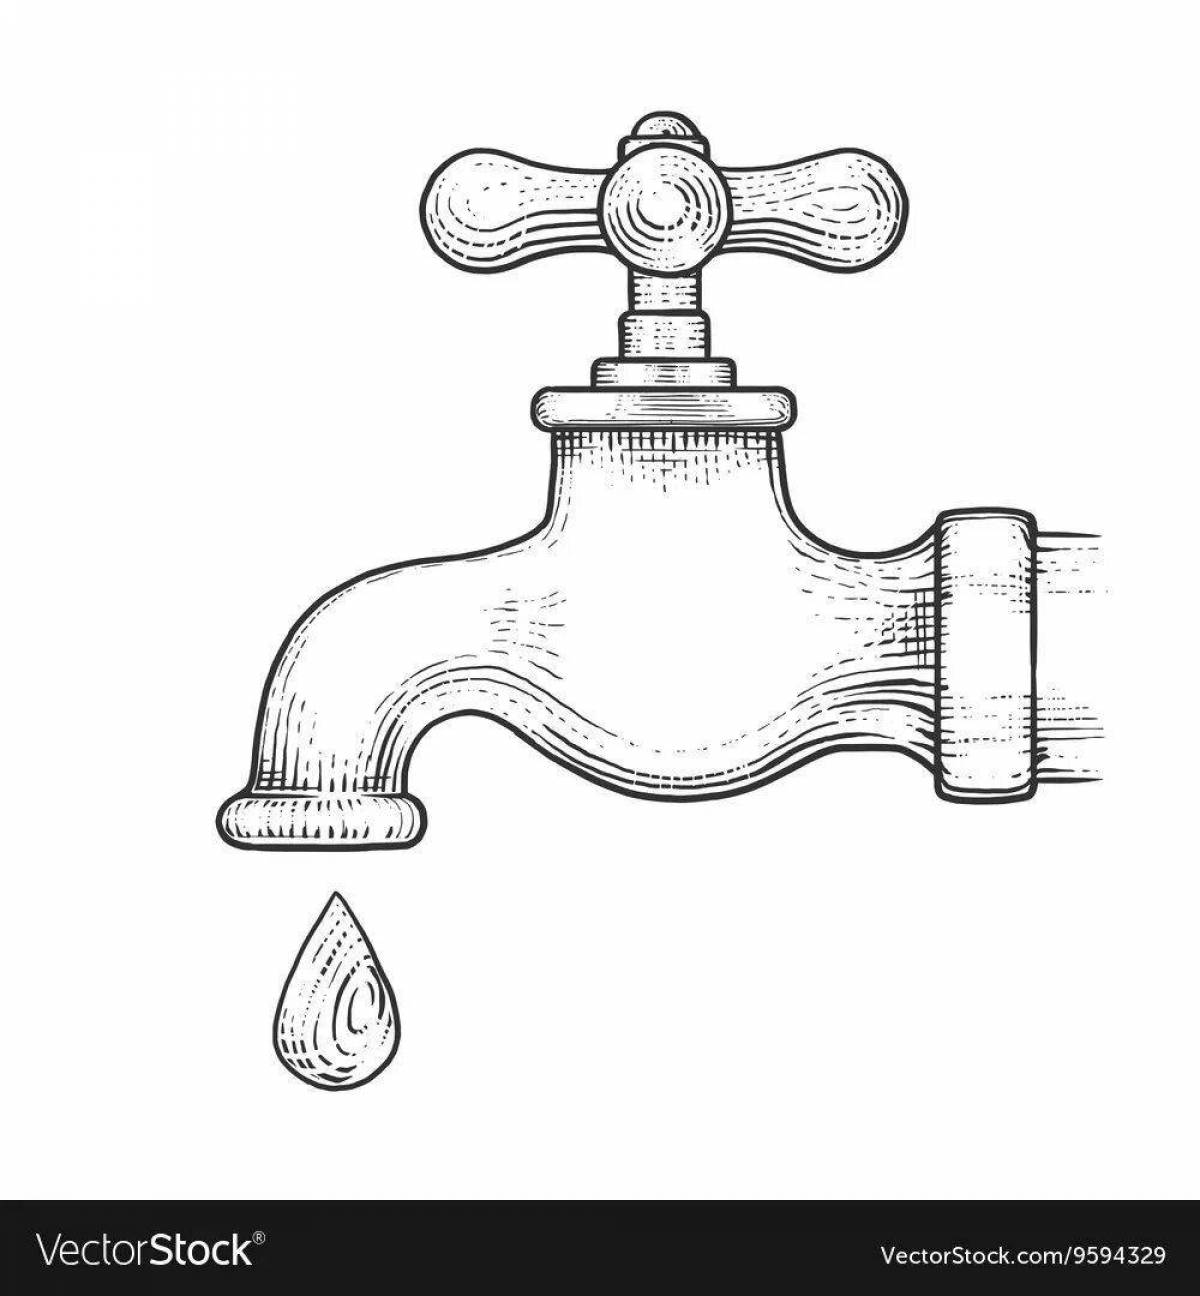 Joyful water faucet coloring page for kids